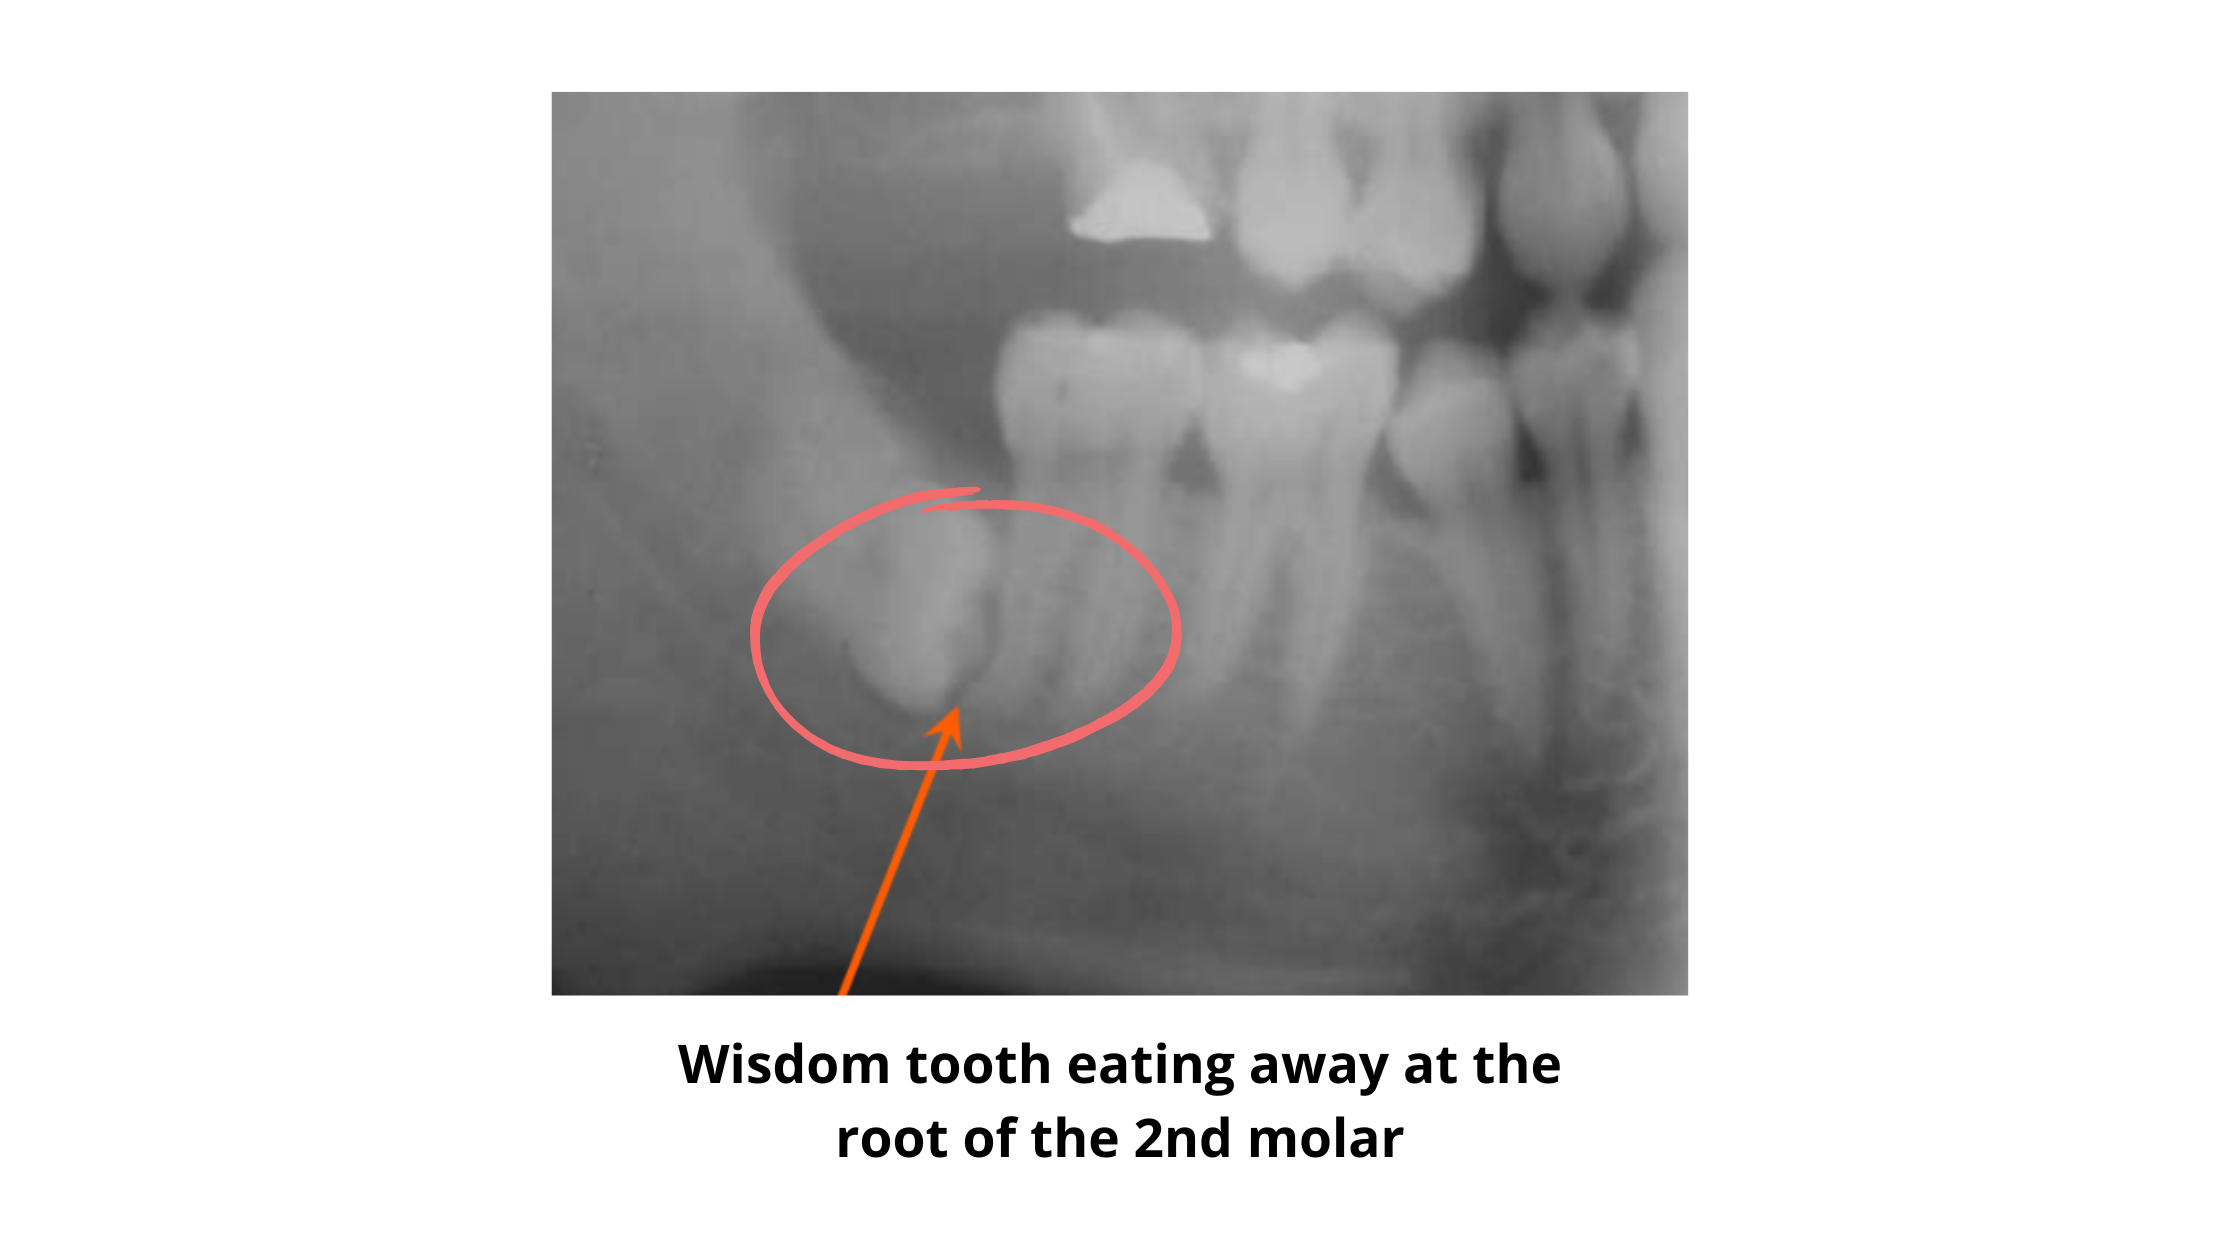 Dental x-rays images showing an impacted lower wisdom tooth eating away at the roots of the second molar